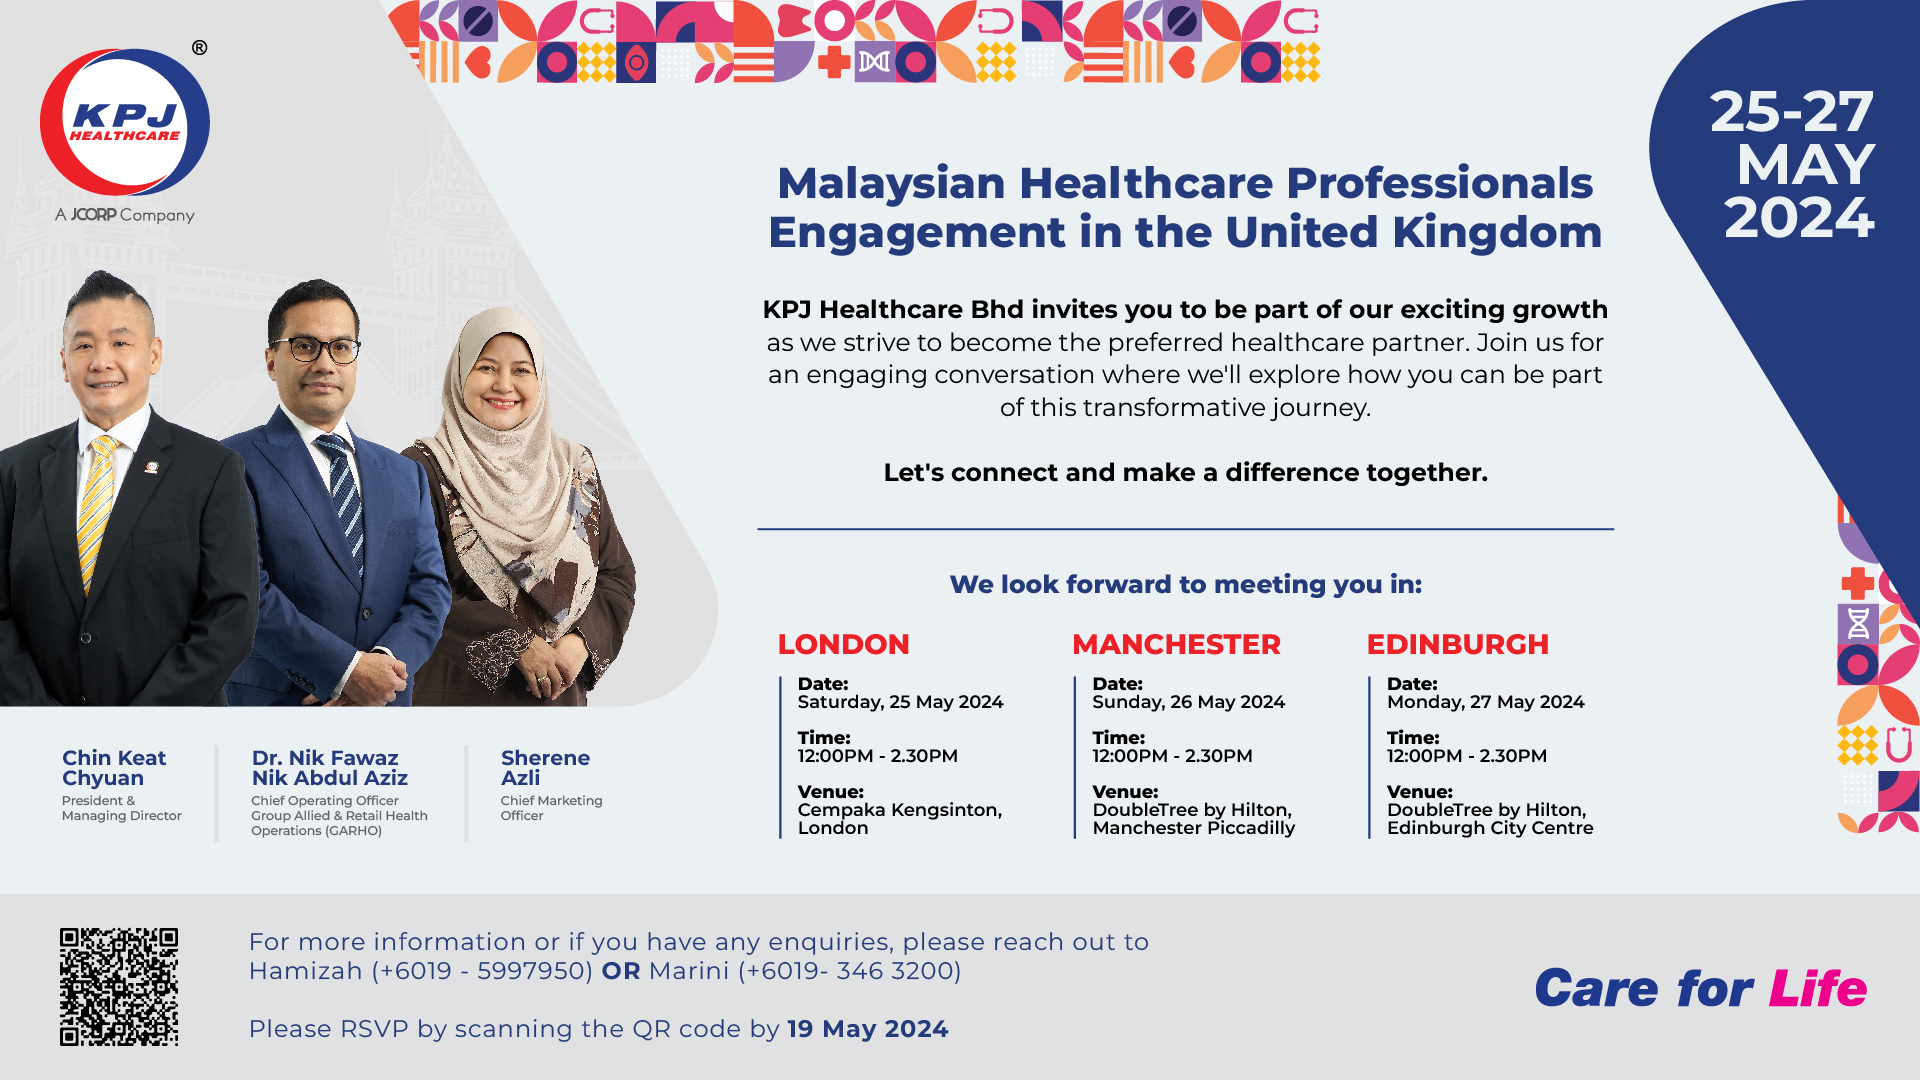 Malaysian Healthcare Professionals Engagement in London